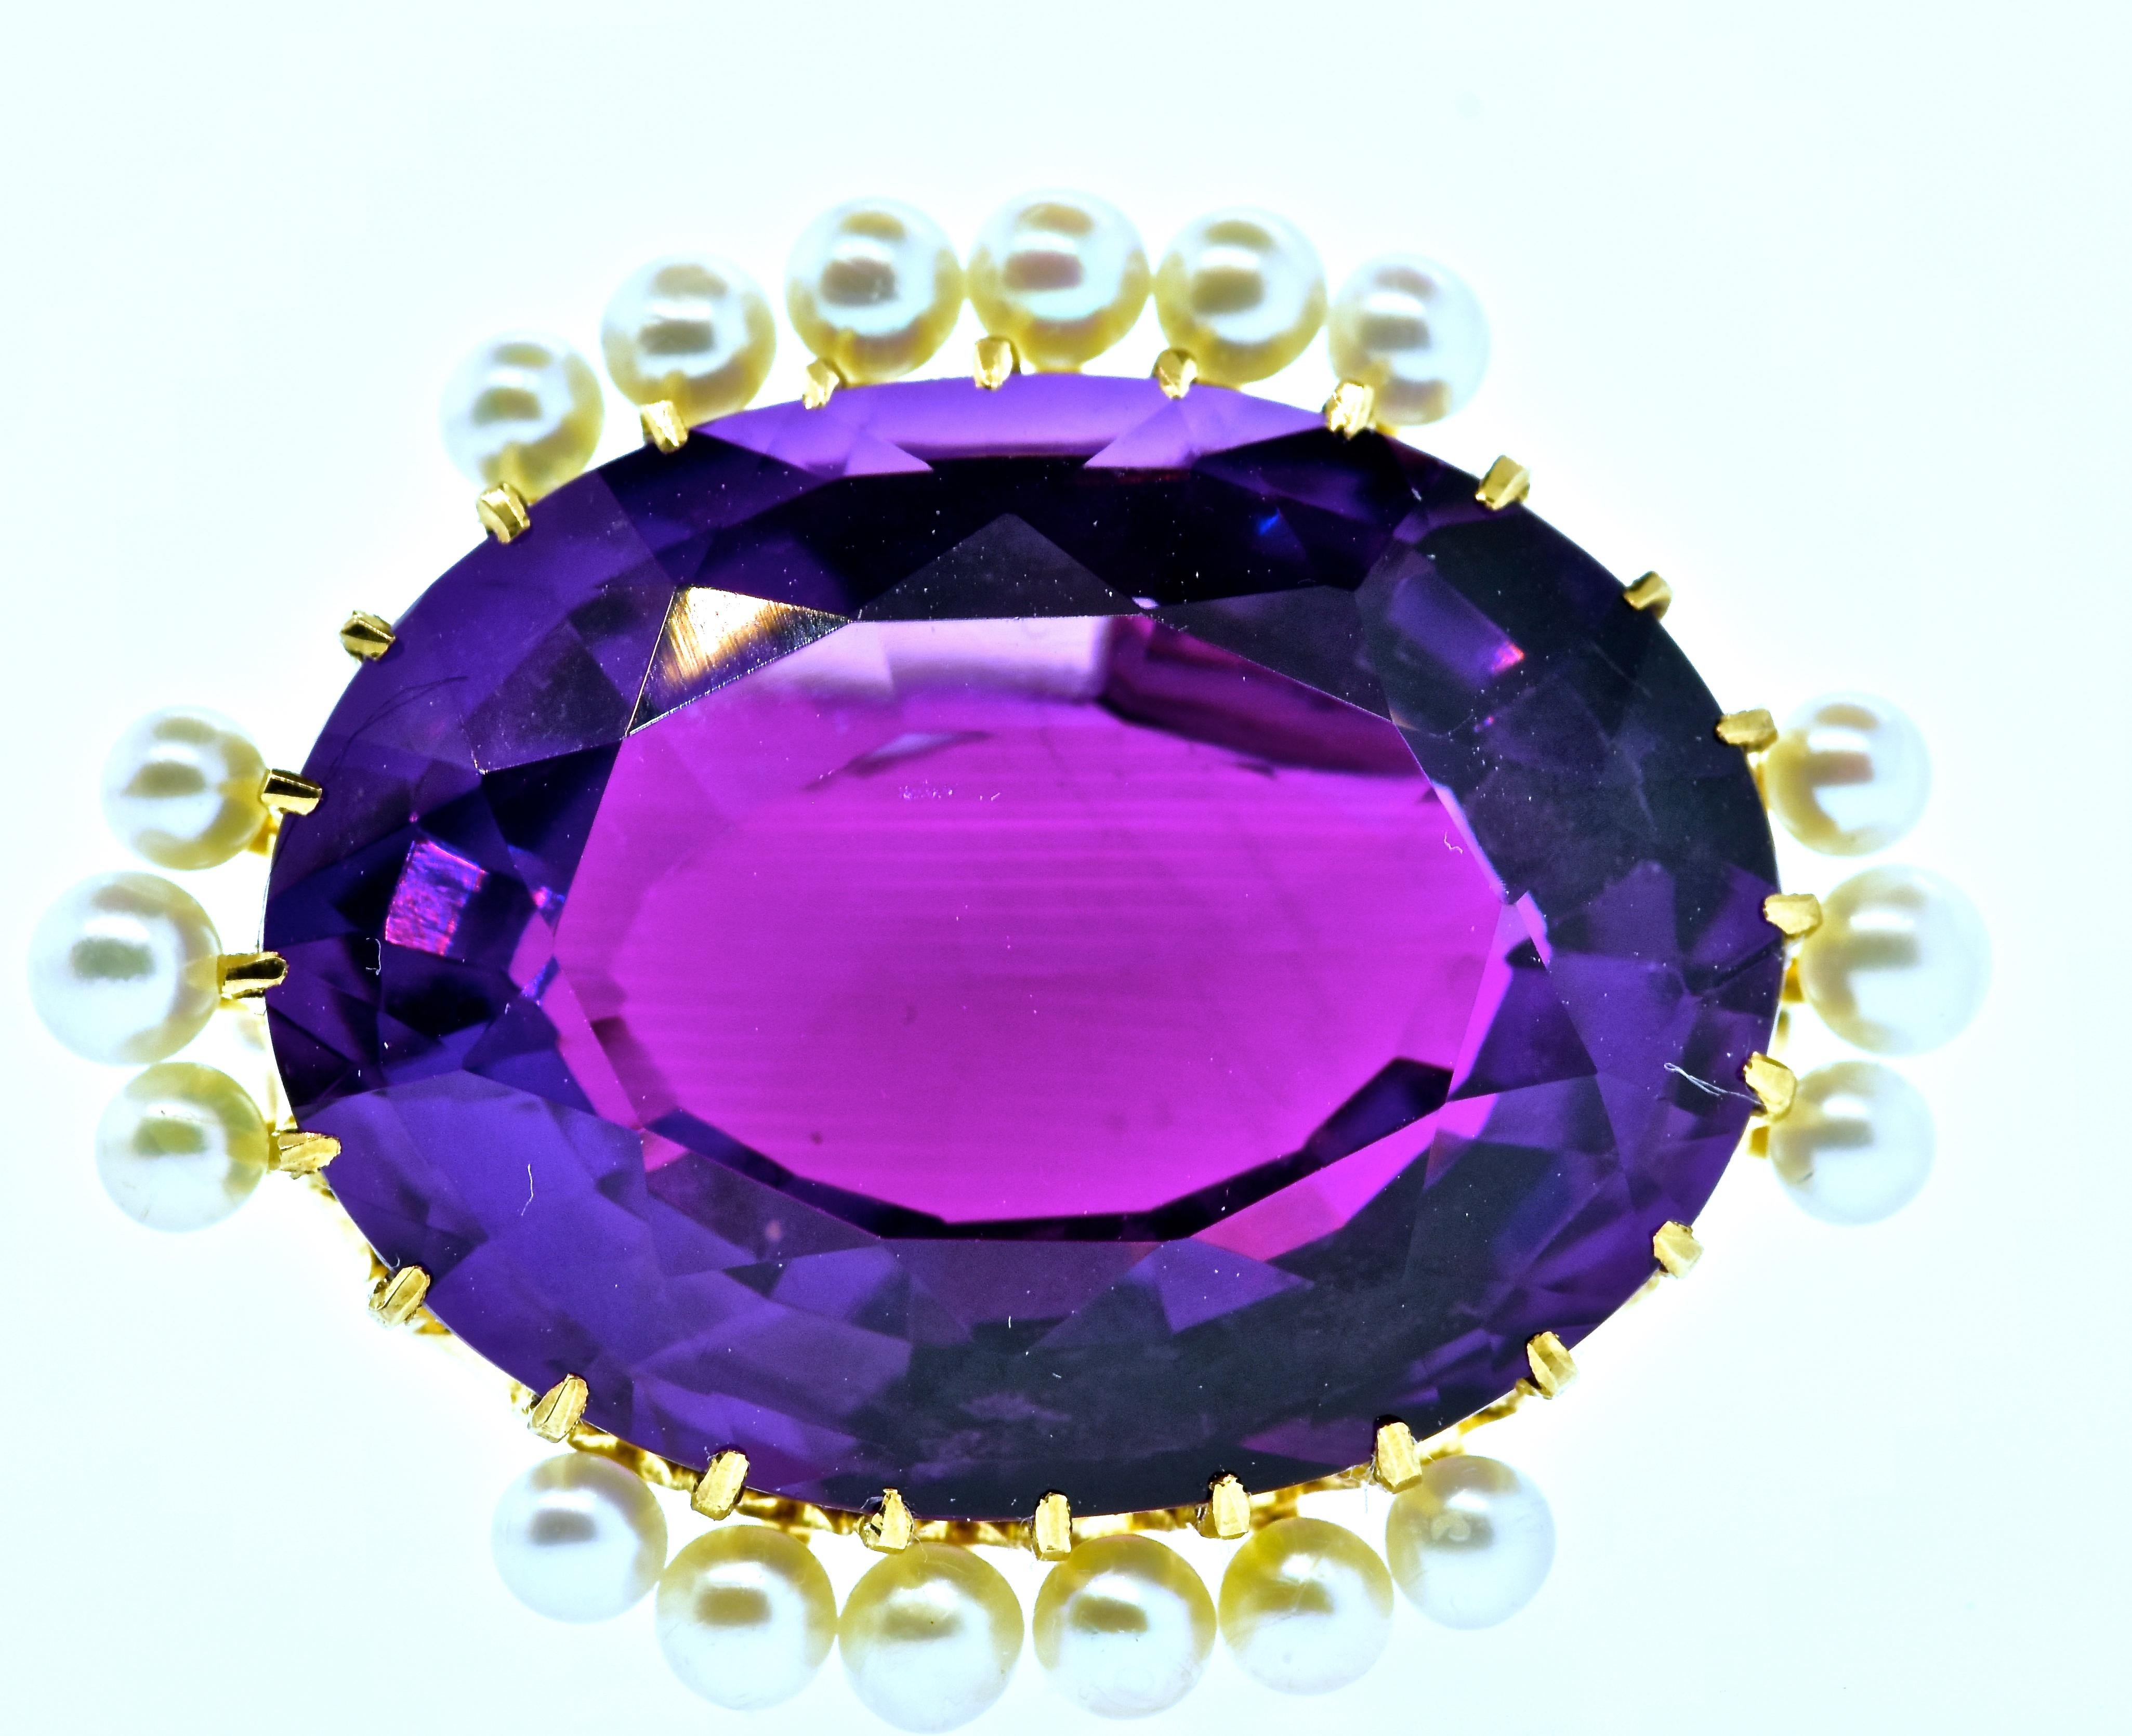 Antique pin centering a large oval natural bright purple (with no unwanted muddy tones) amethyst estimated to weigh over 22 cts.  There are 18 natural oriental round pearls, measuring 2-3 mm.  These pearls display a high luster and are uniform in